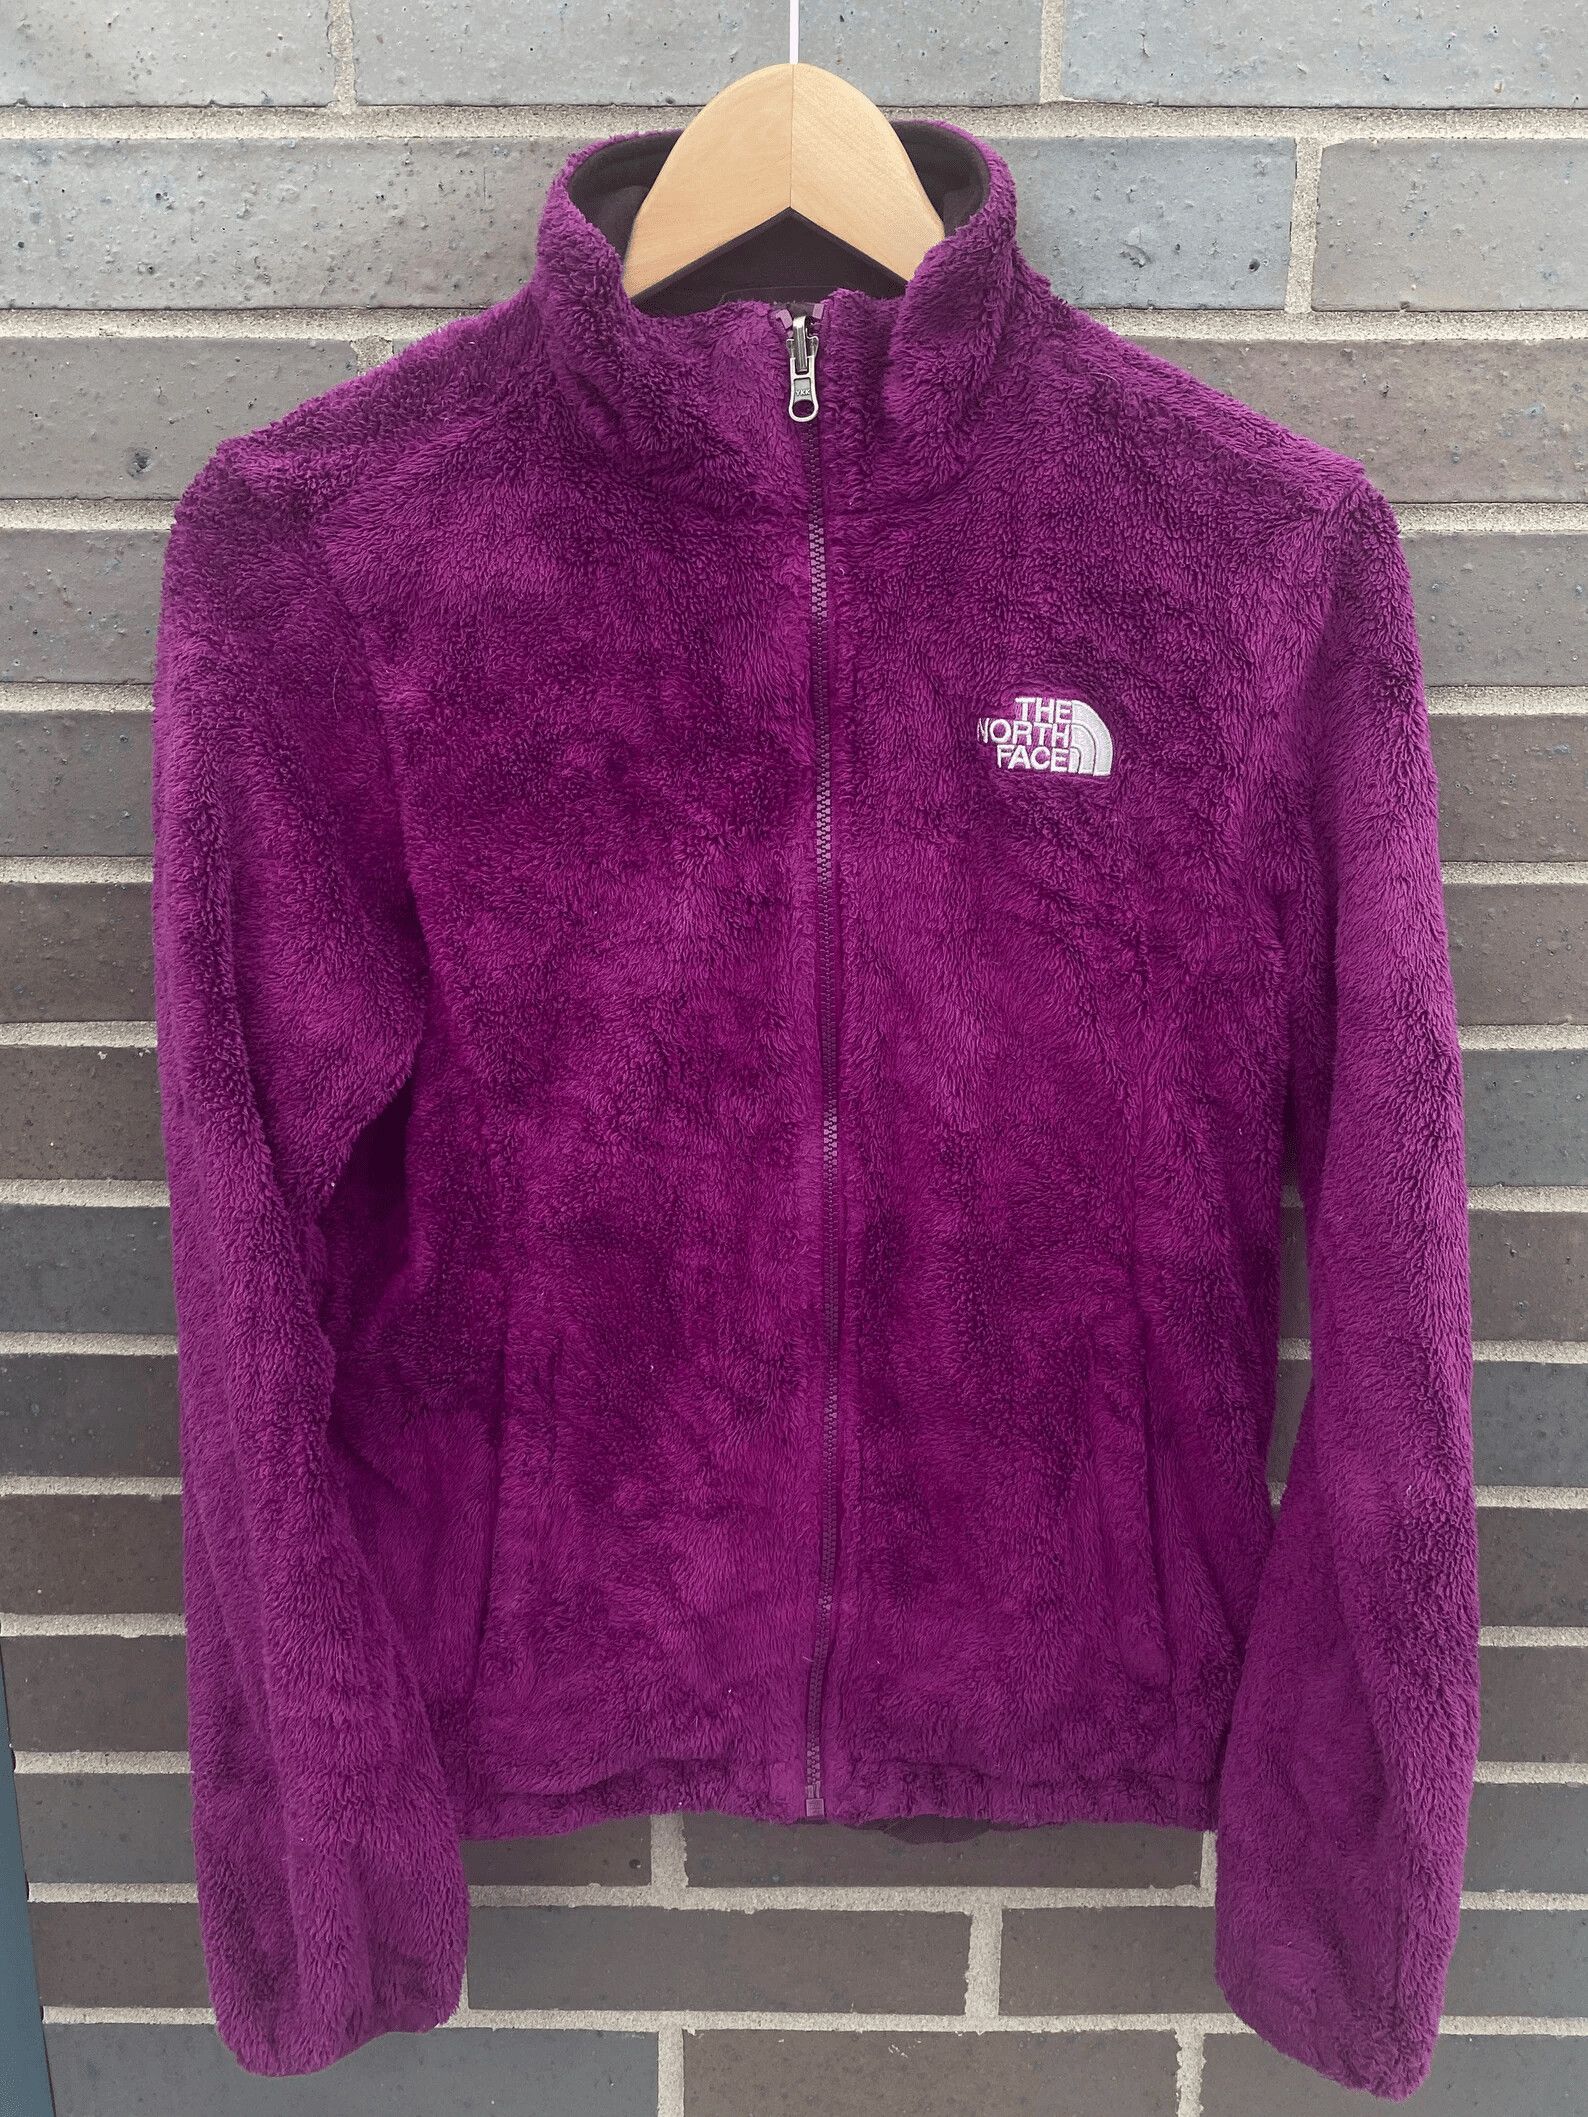 The North Face Vintage 1990s The North Face Pile Fleece Sweatshirt Size S / US 4 / IT 40 - 1 Preview